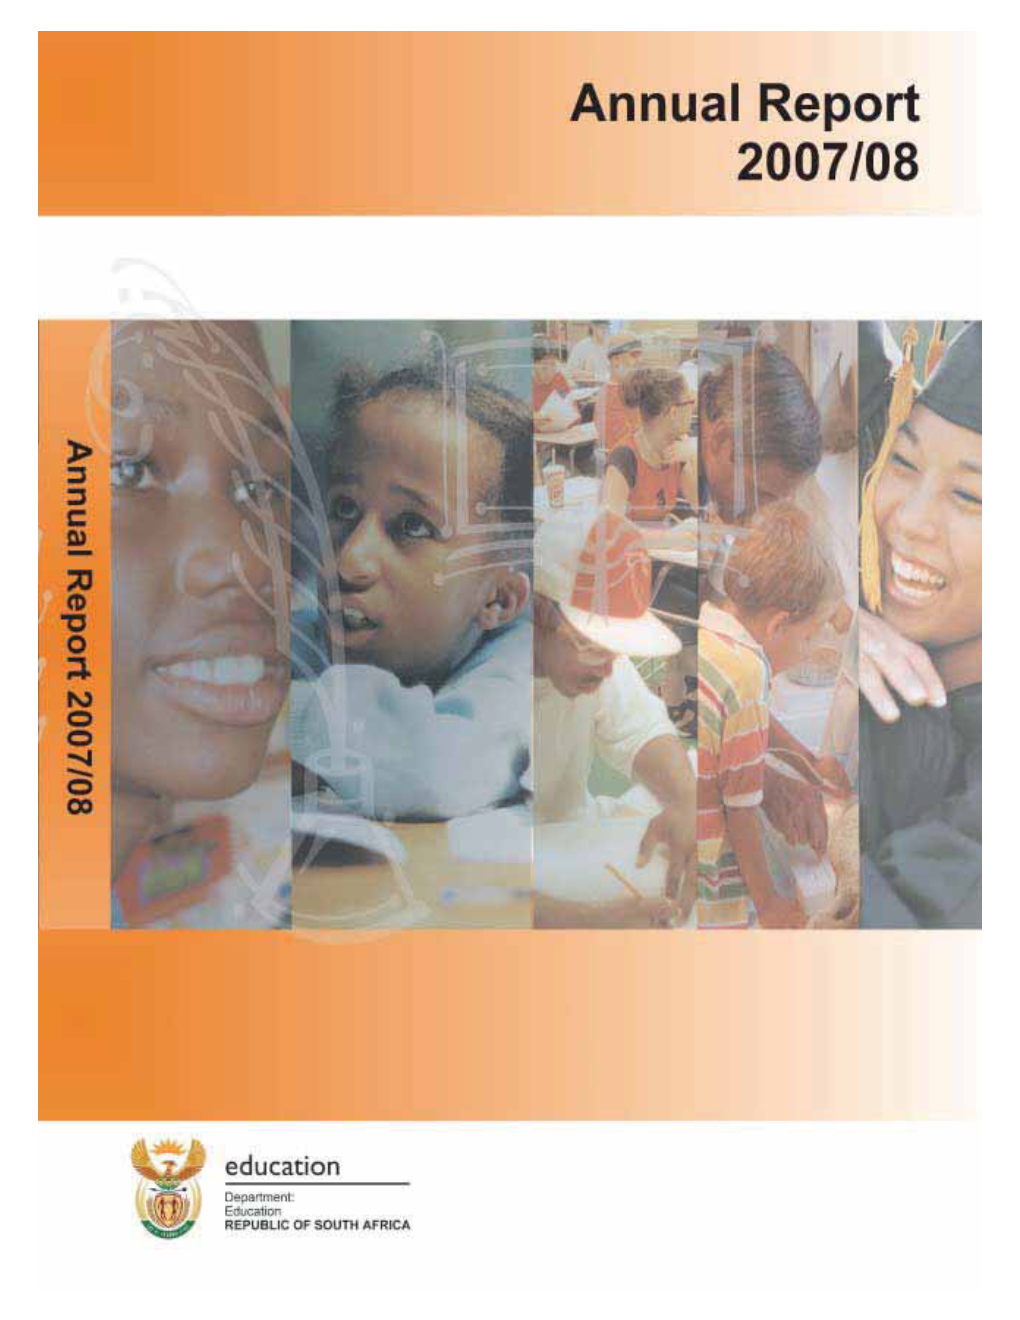 Department of Education Annual Report 2007/2008